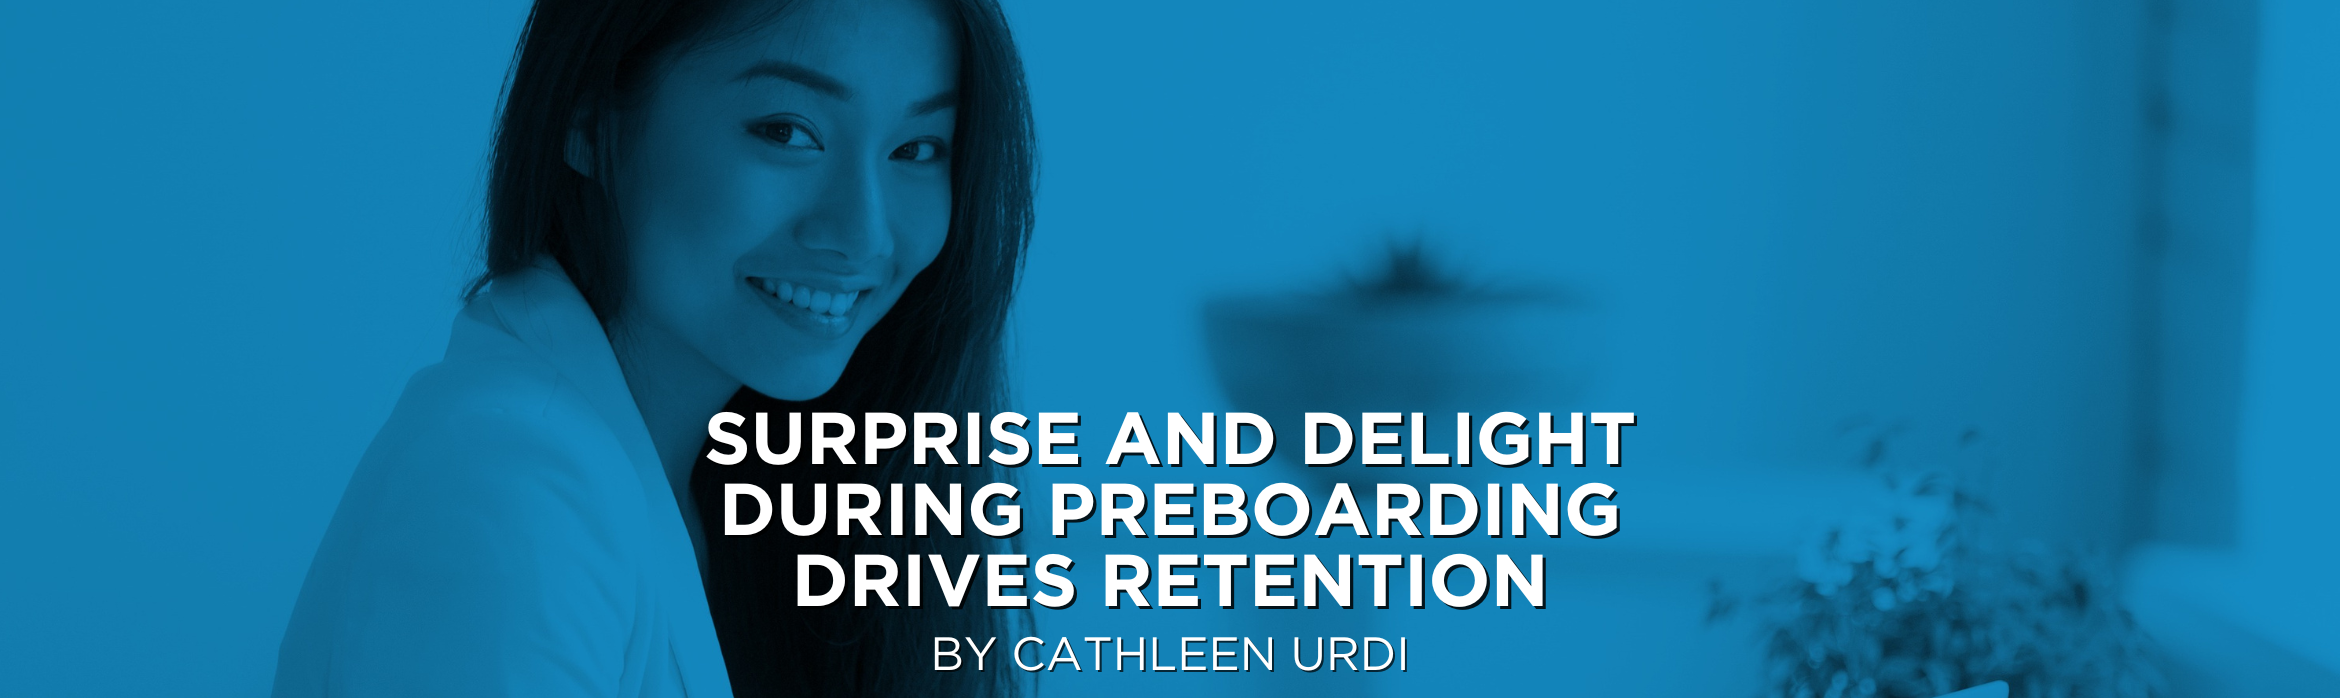 Surprise and Delight During Preboarding Drives Retention